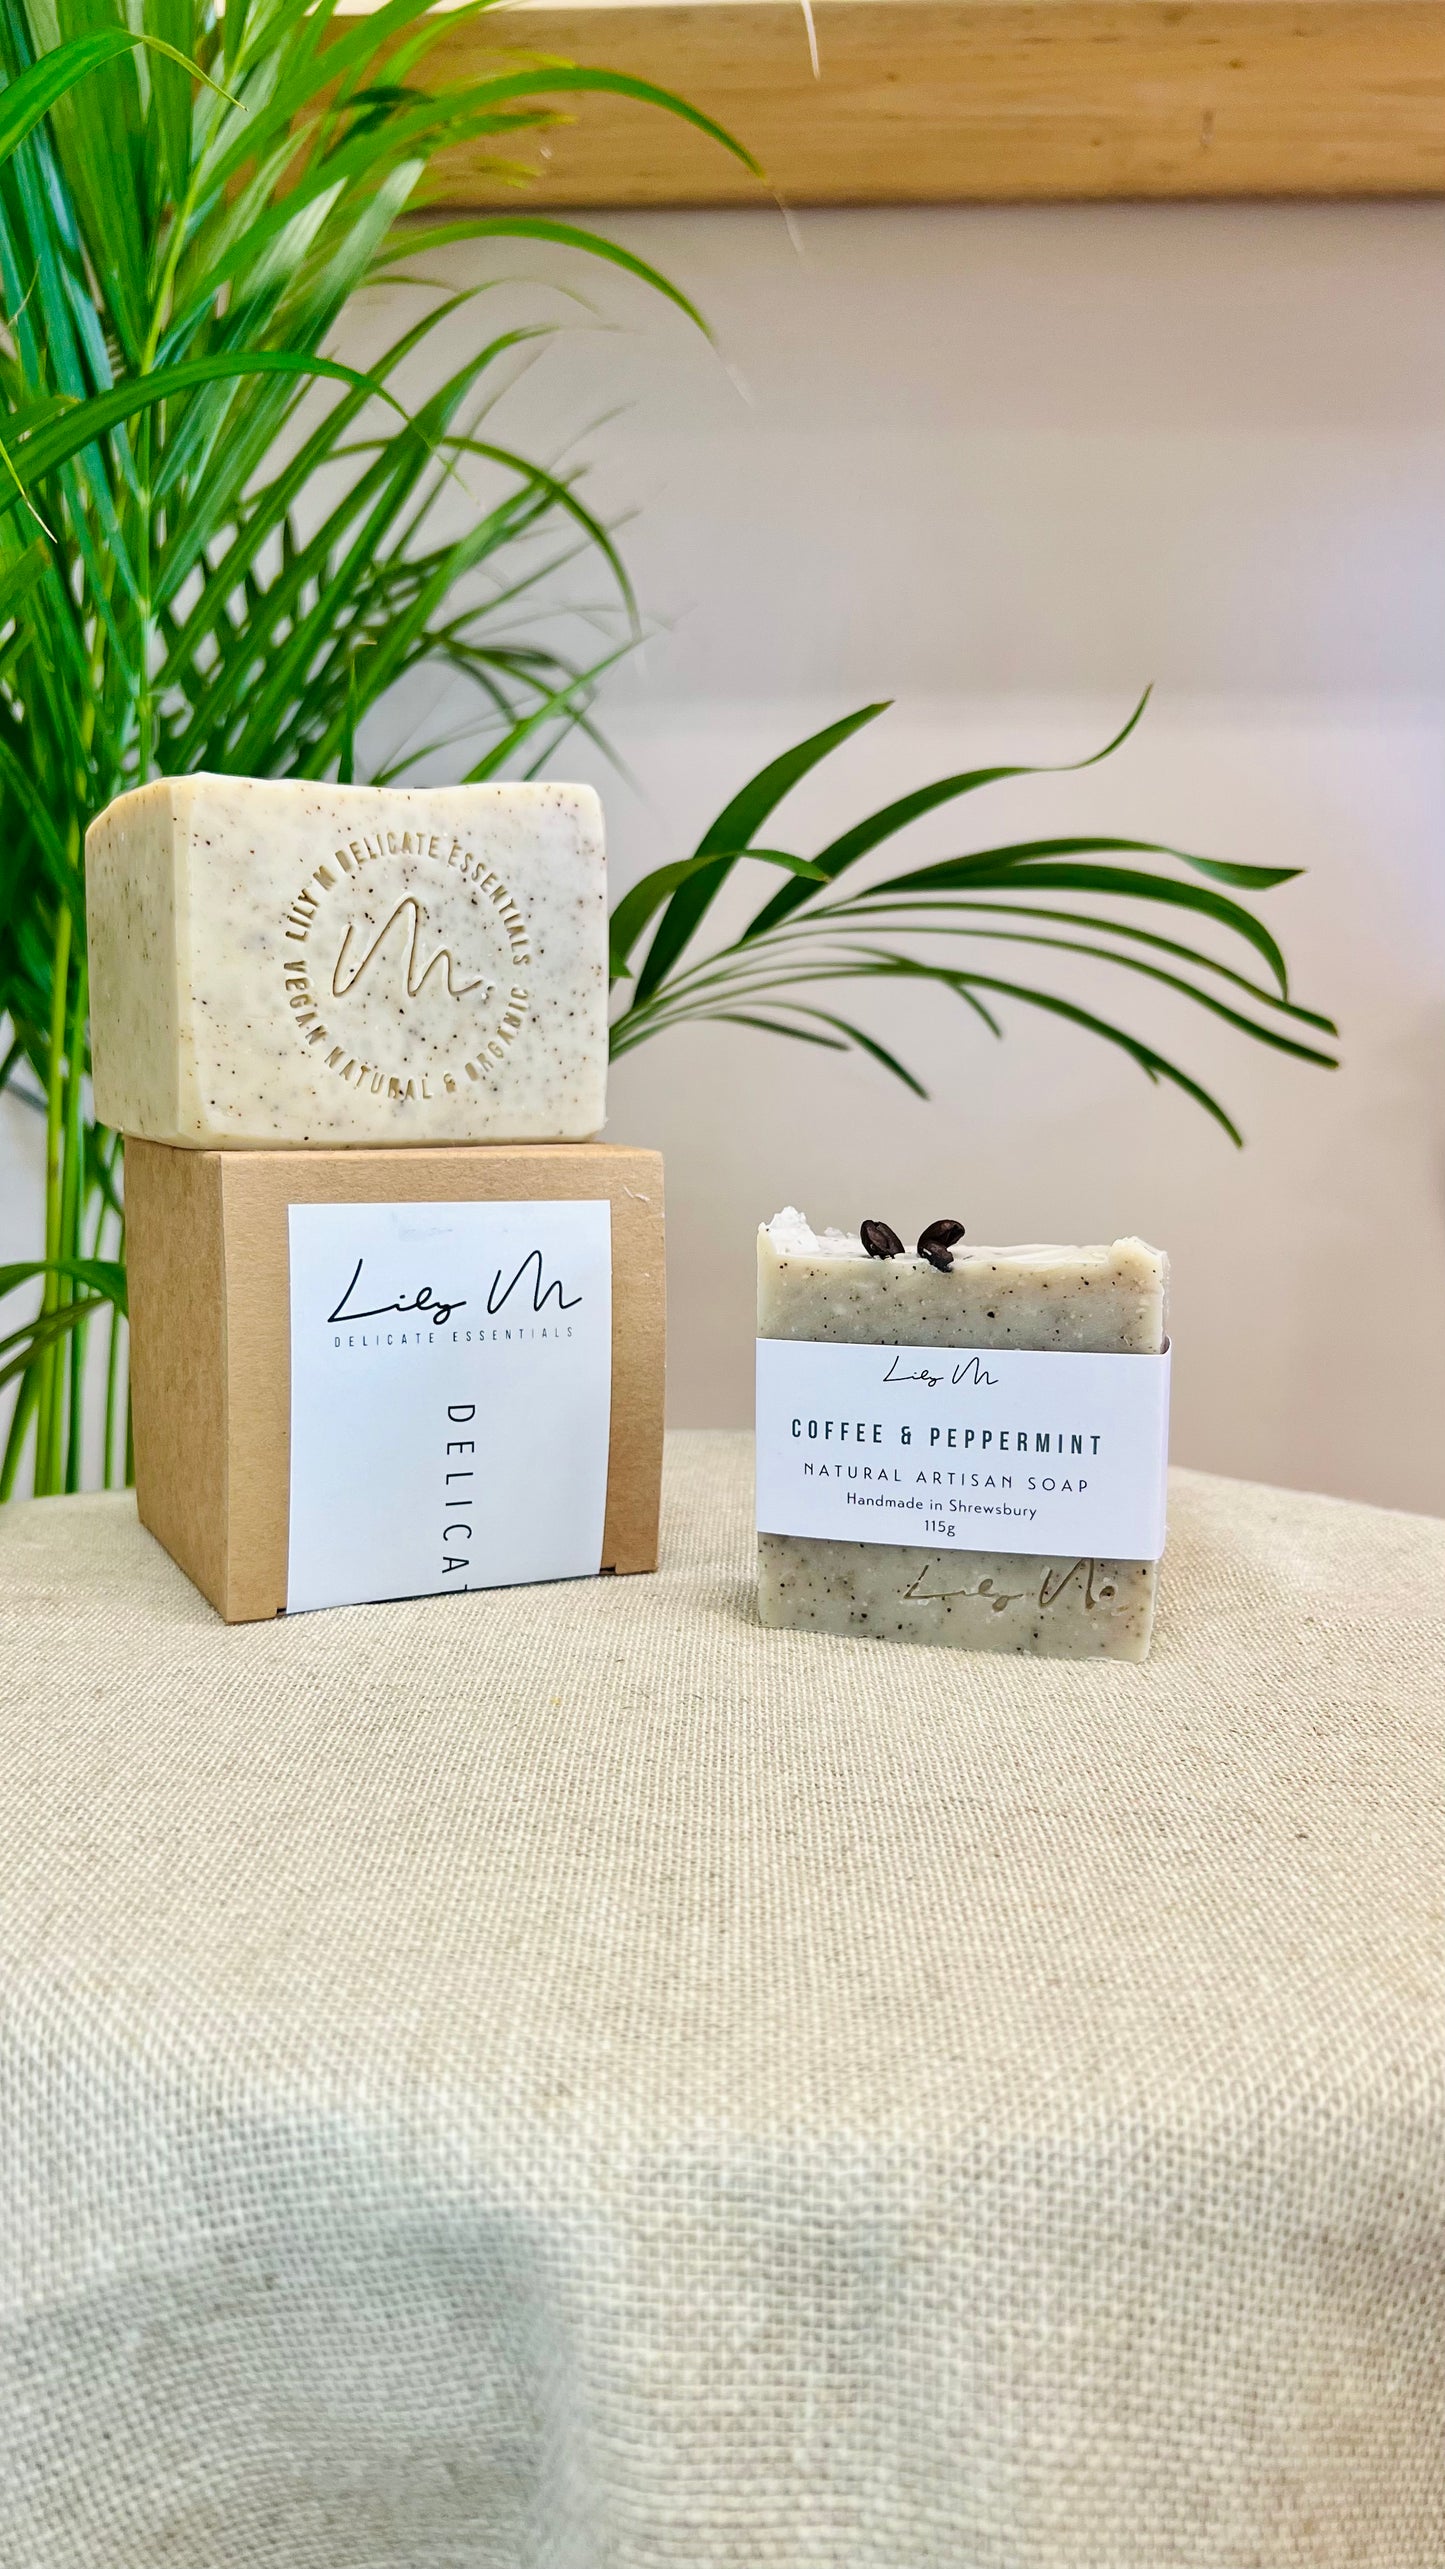 Exfoliating Coffee Grounds & Peppermint Soap Body Bar